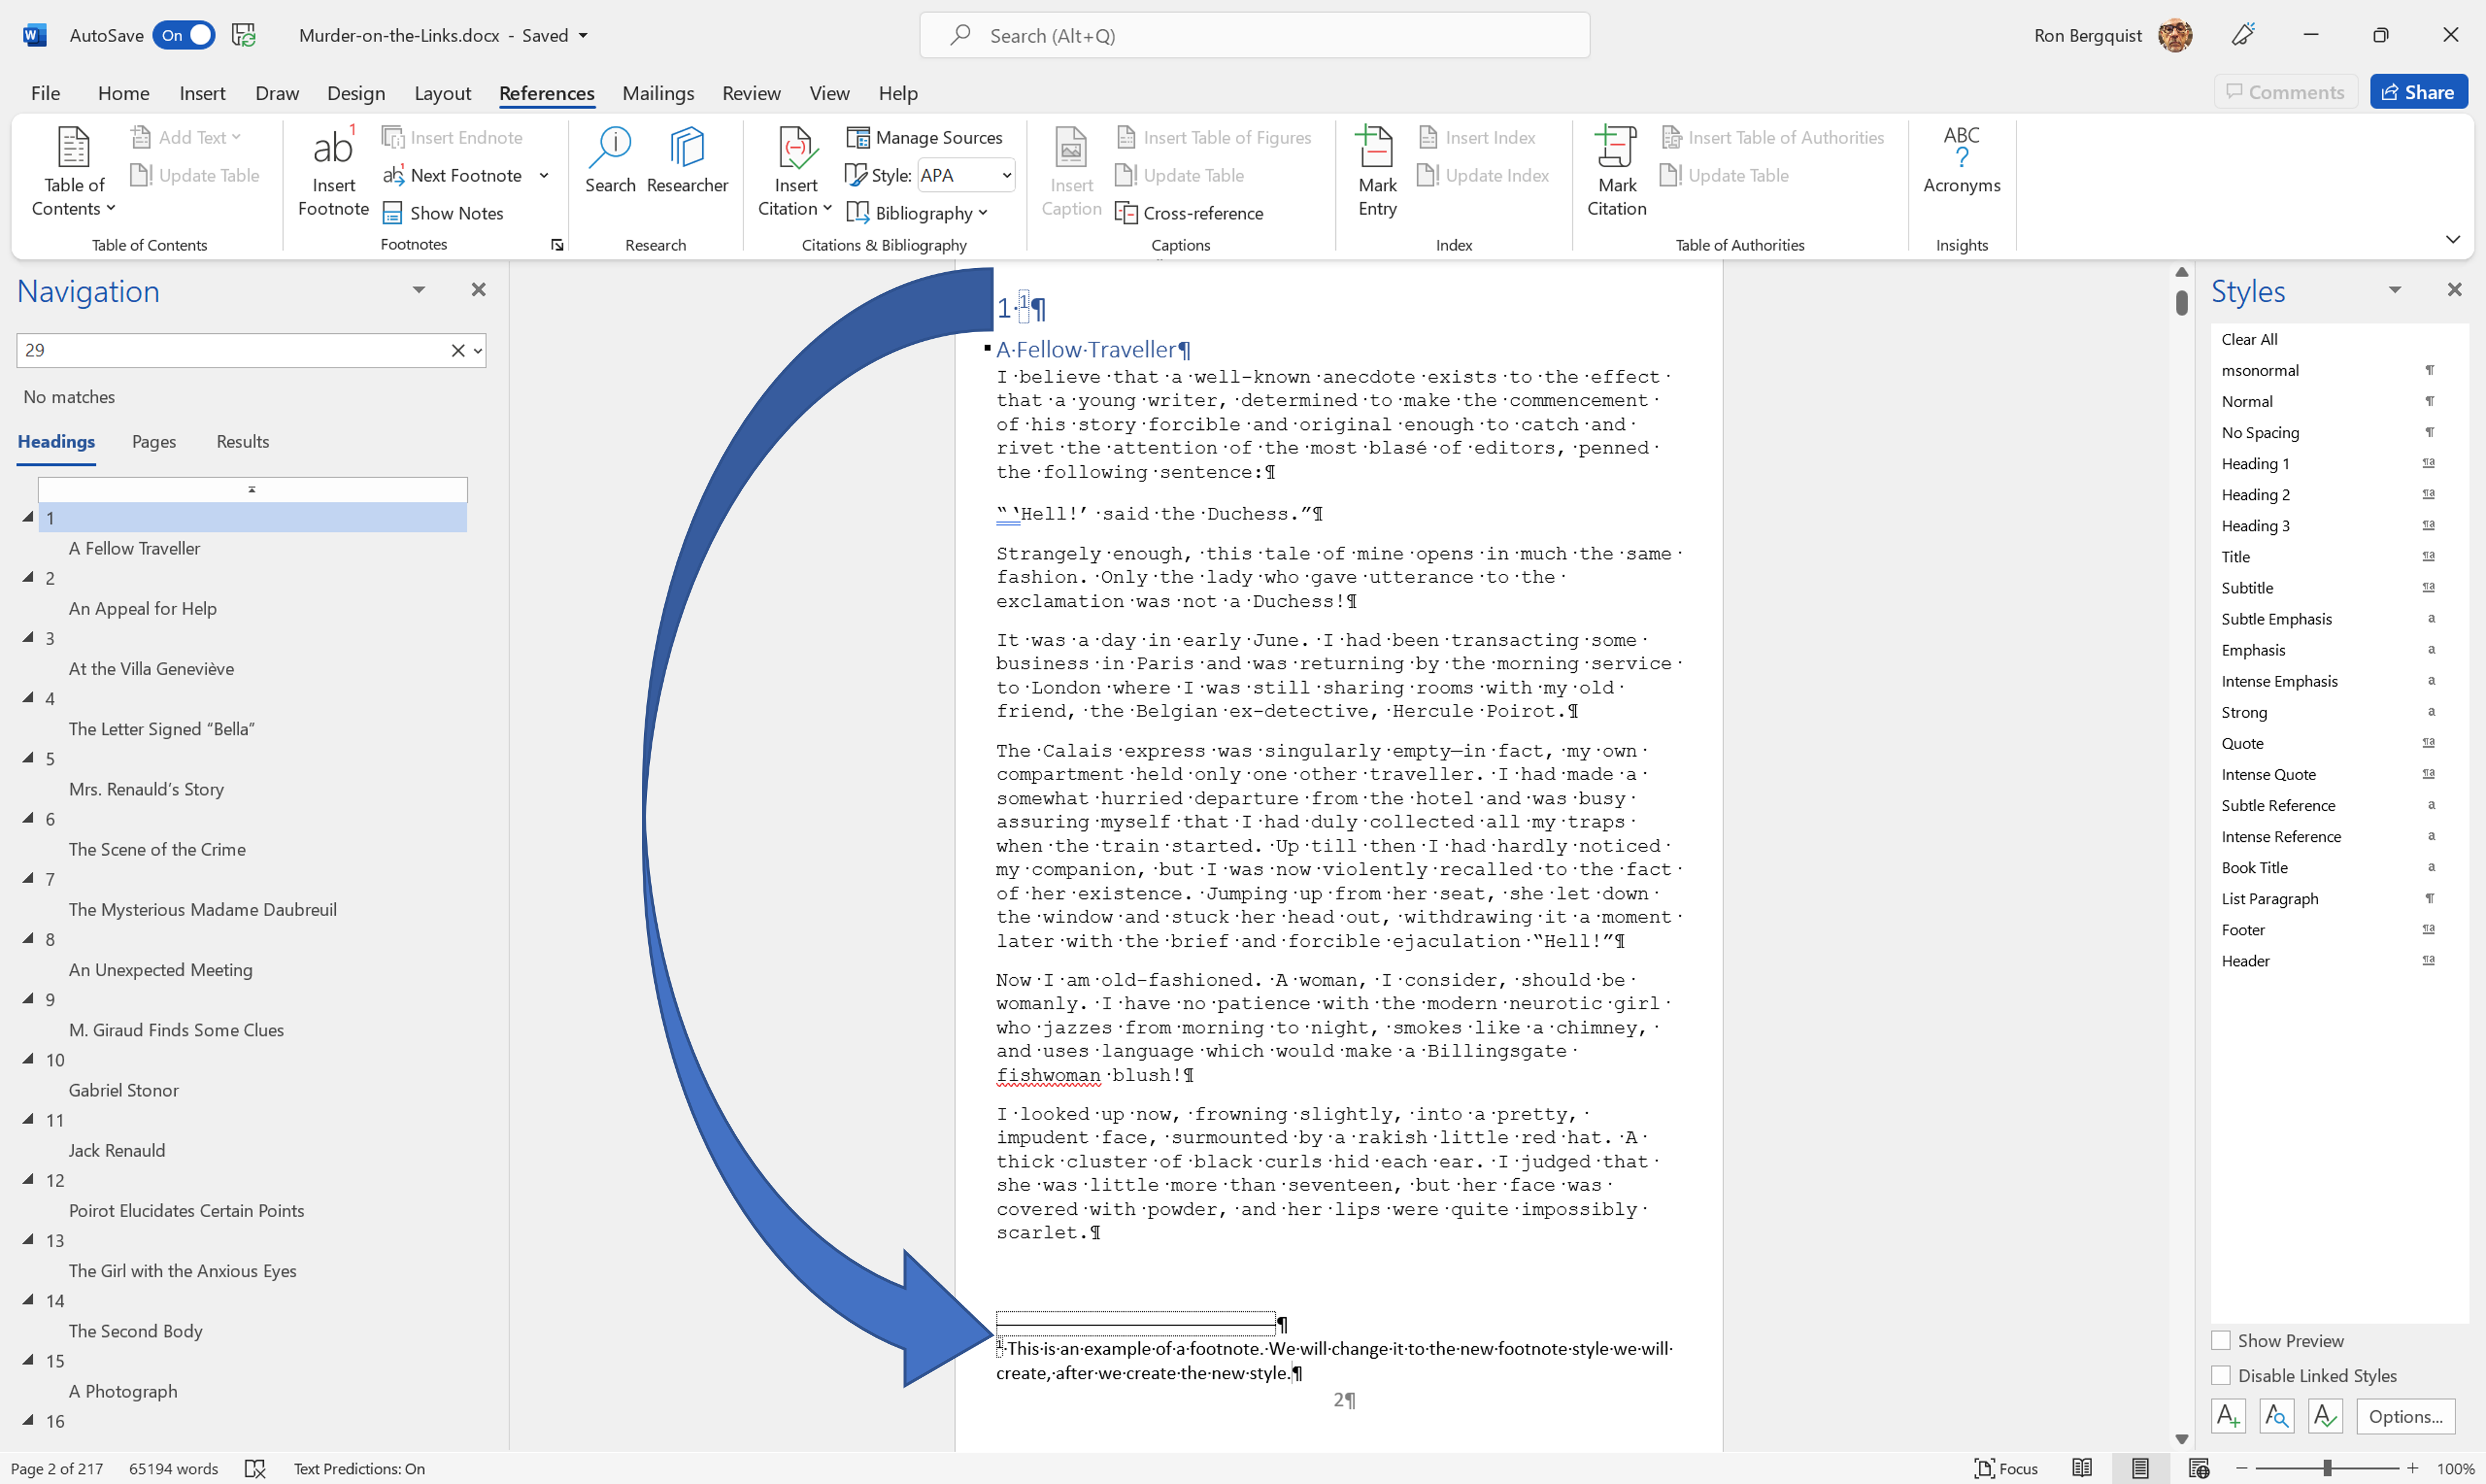 [MSWord 365 foot/endnote tool and location]